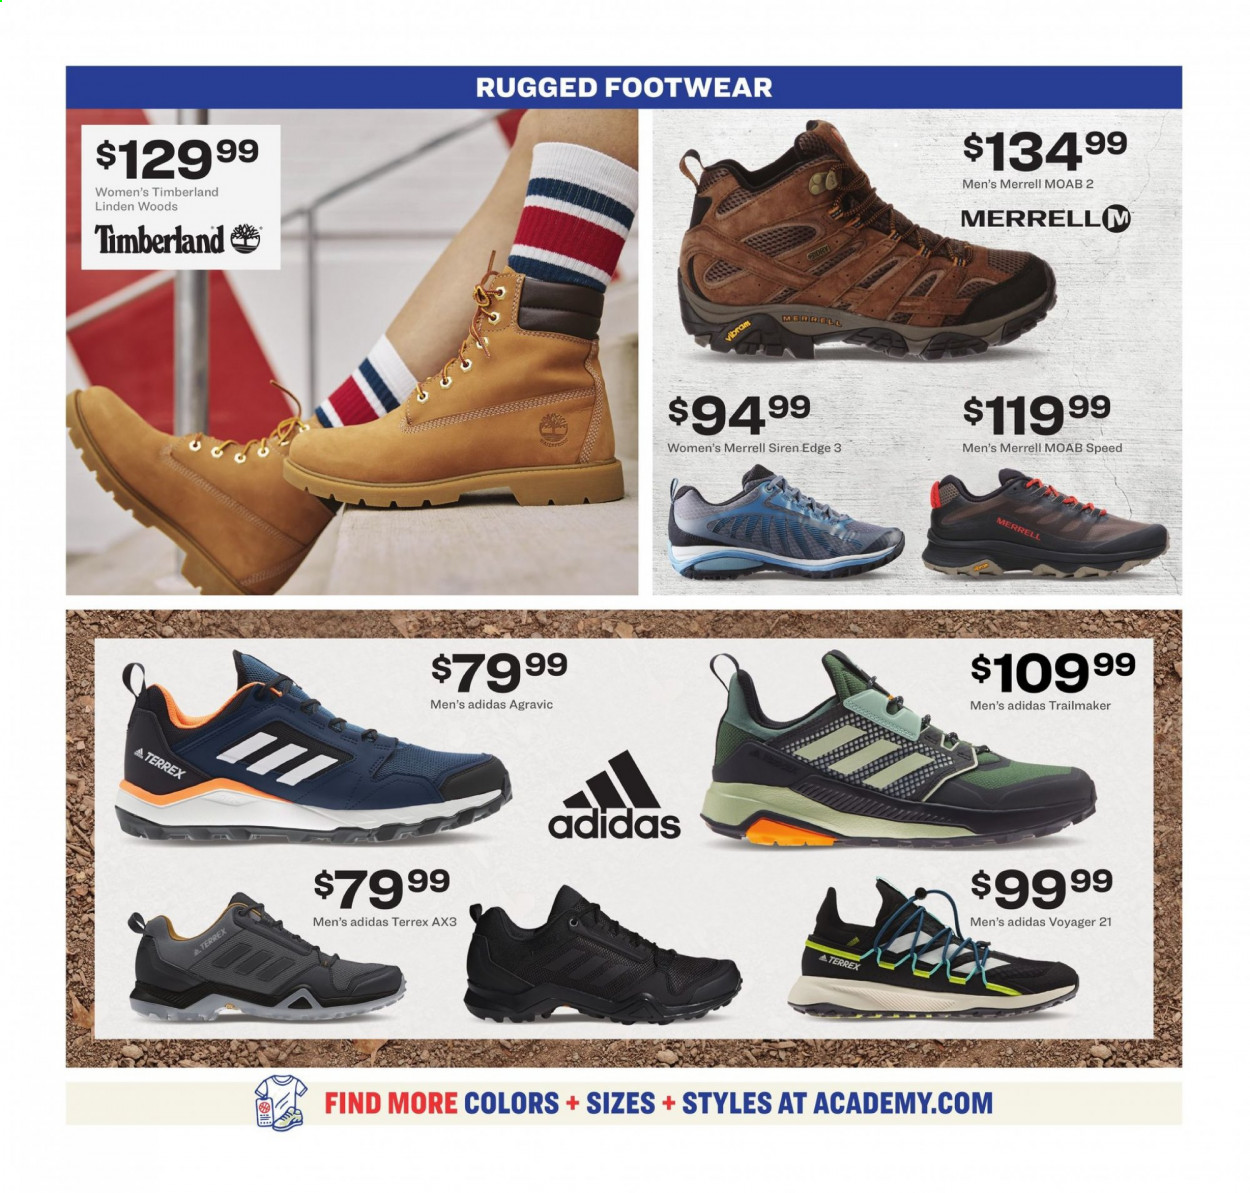 Academy Sports + Outdoors ad  - 07.19.2021 - 08.01.2021.